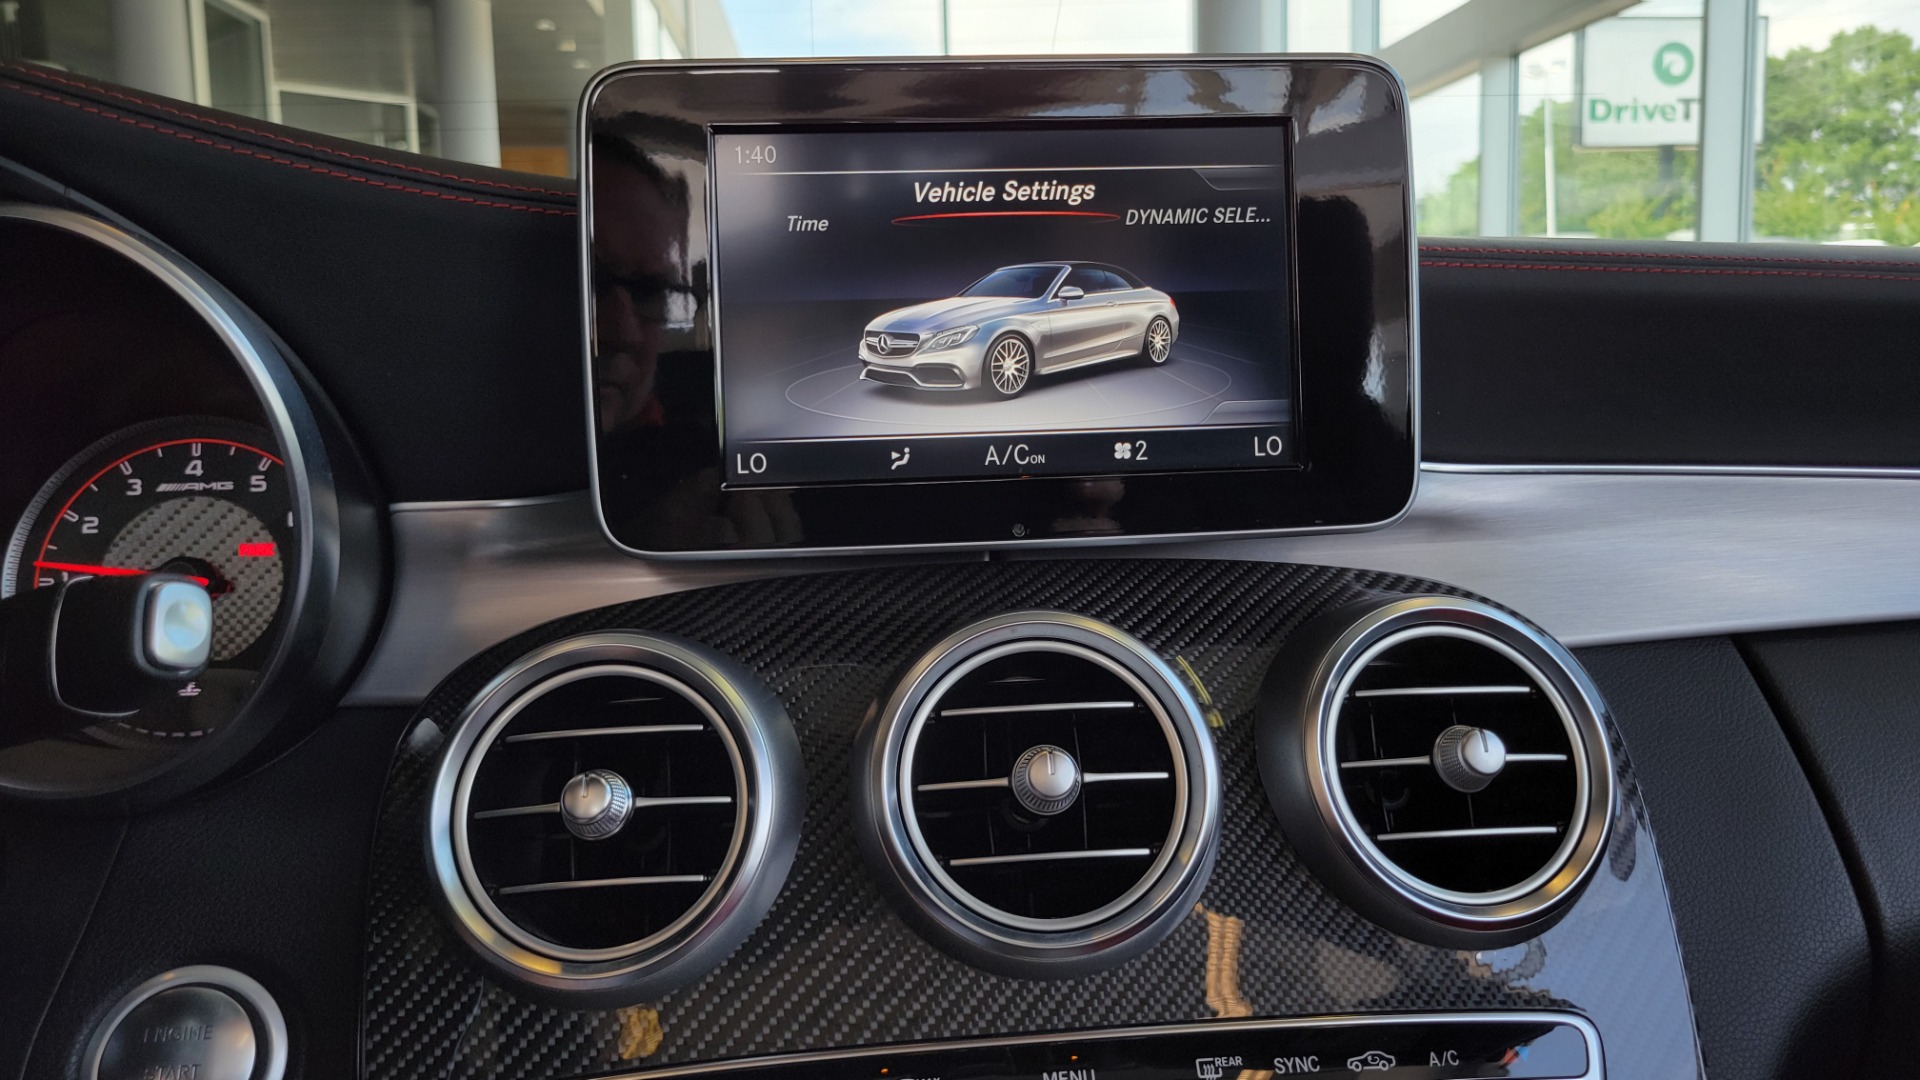 Used 2018 Mercedes-Benz C-CLASS AMG C 63 S CABRIOLET / 4.0L V8 / 7-SPD AUTO / PREMIUM / AMG PERF for sale $71,995 at Formula Imports in Charlotte NC 28227 53